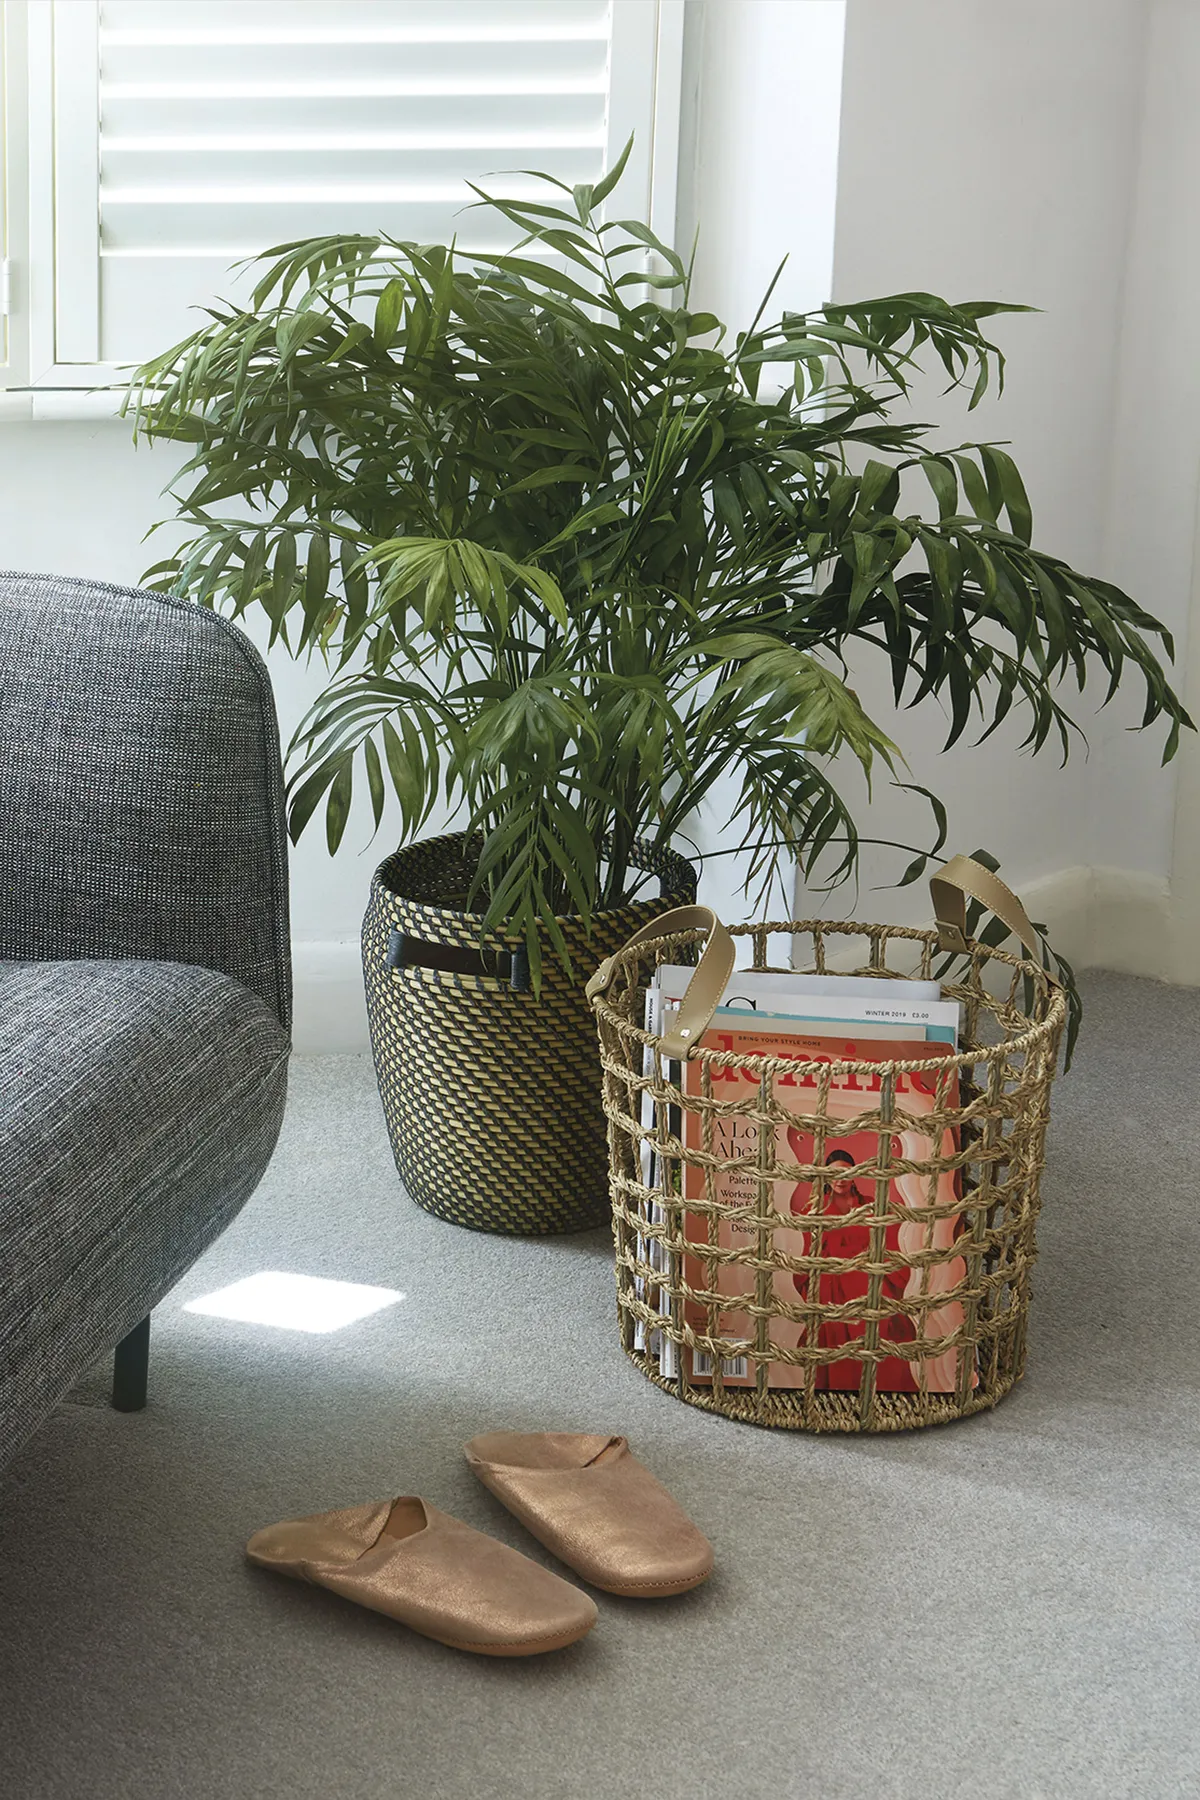 Natural textures add a relaxed, boho feel, with plant pots in woven materials and seagrass and bamboo baskets. Adding plants has helped breathe life into the scheme and also adds a pop of colour